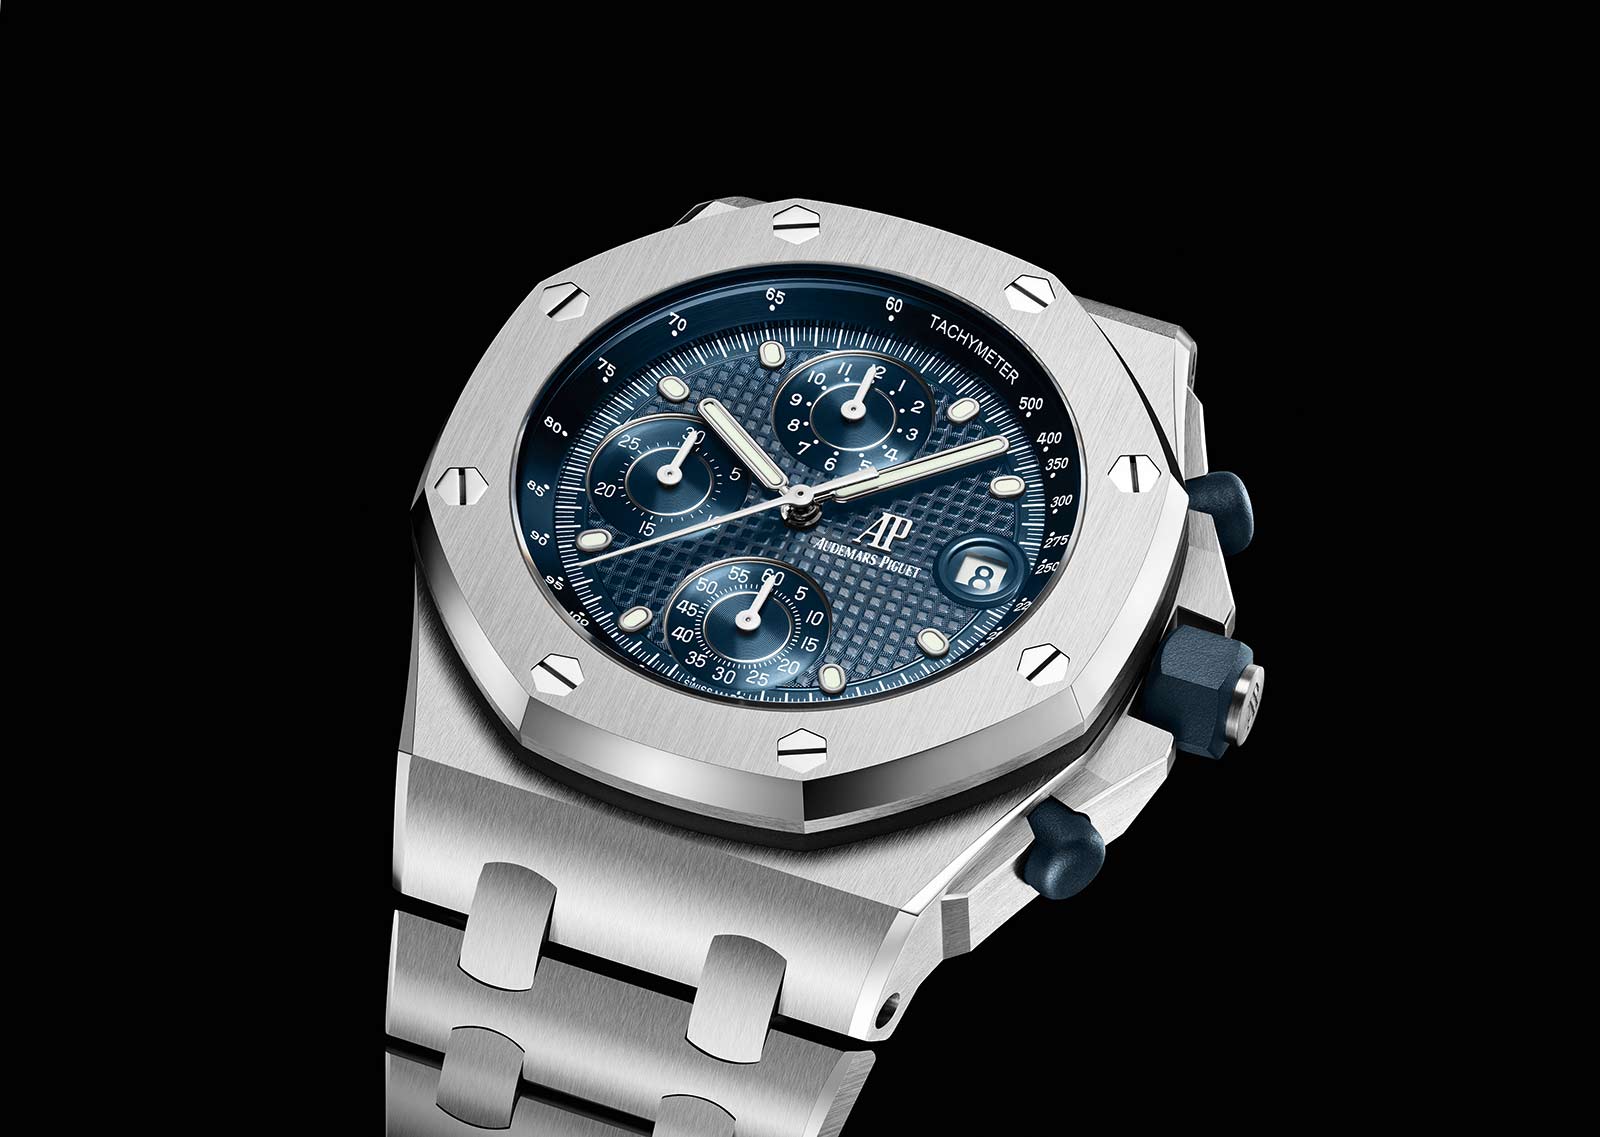 Audemars Piguet - Royal Oak Offshore Chronograph 42 mm, 2021 Editions |  Time and Watches | The watch blog